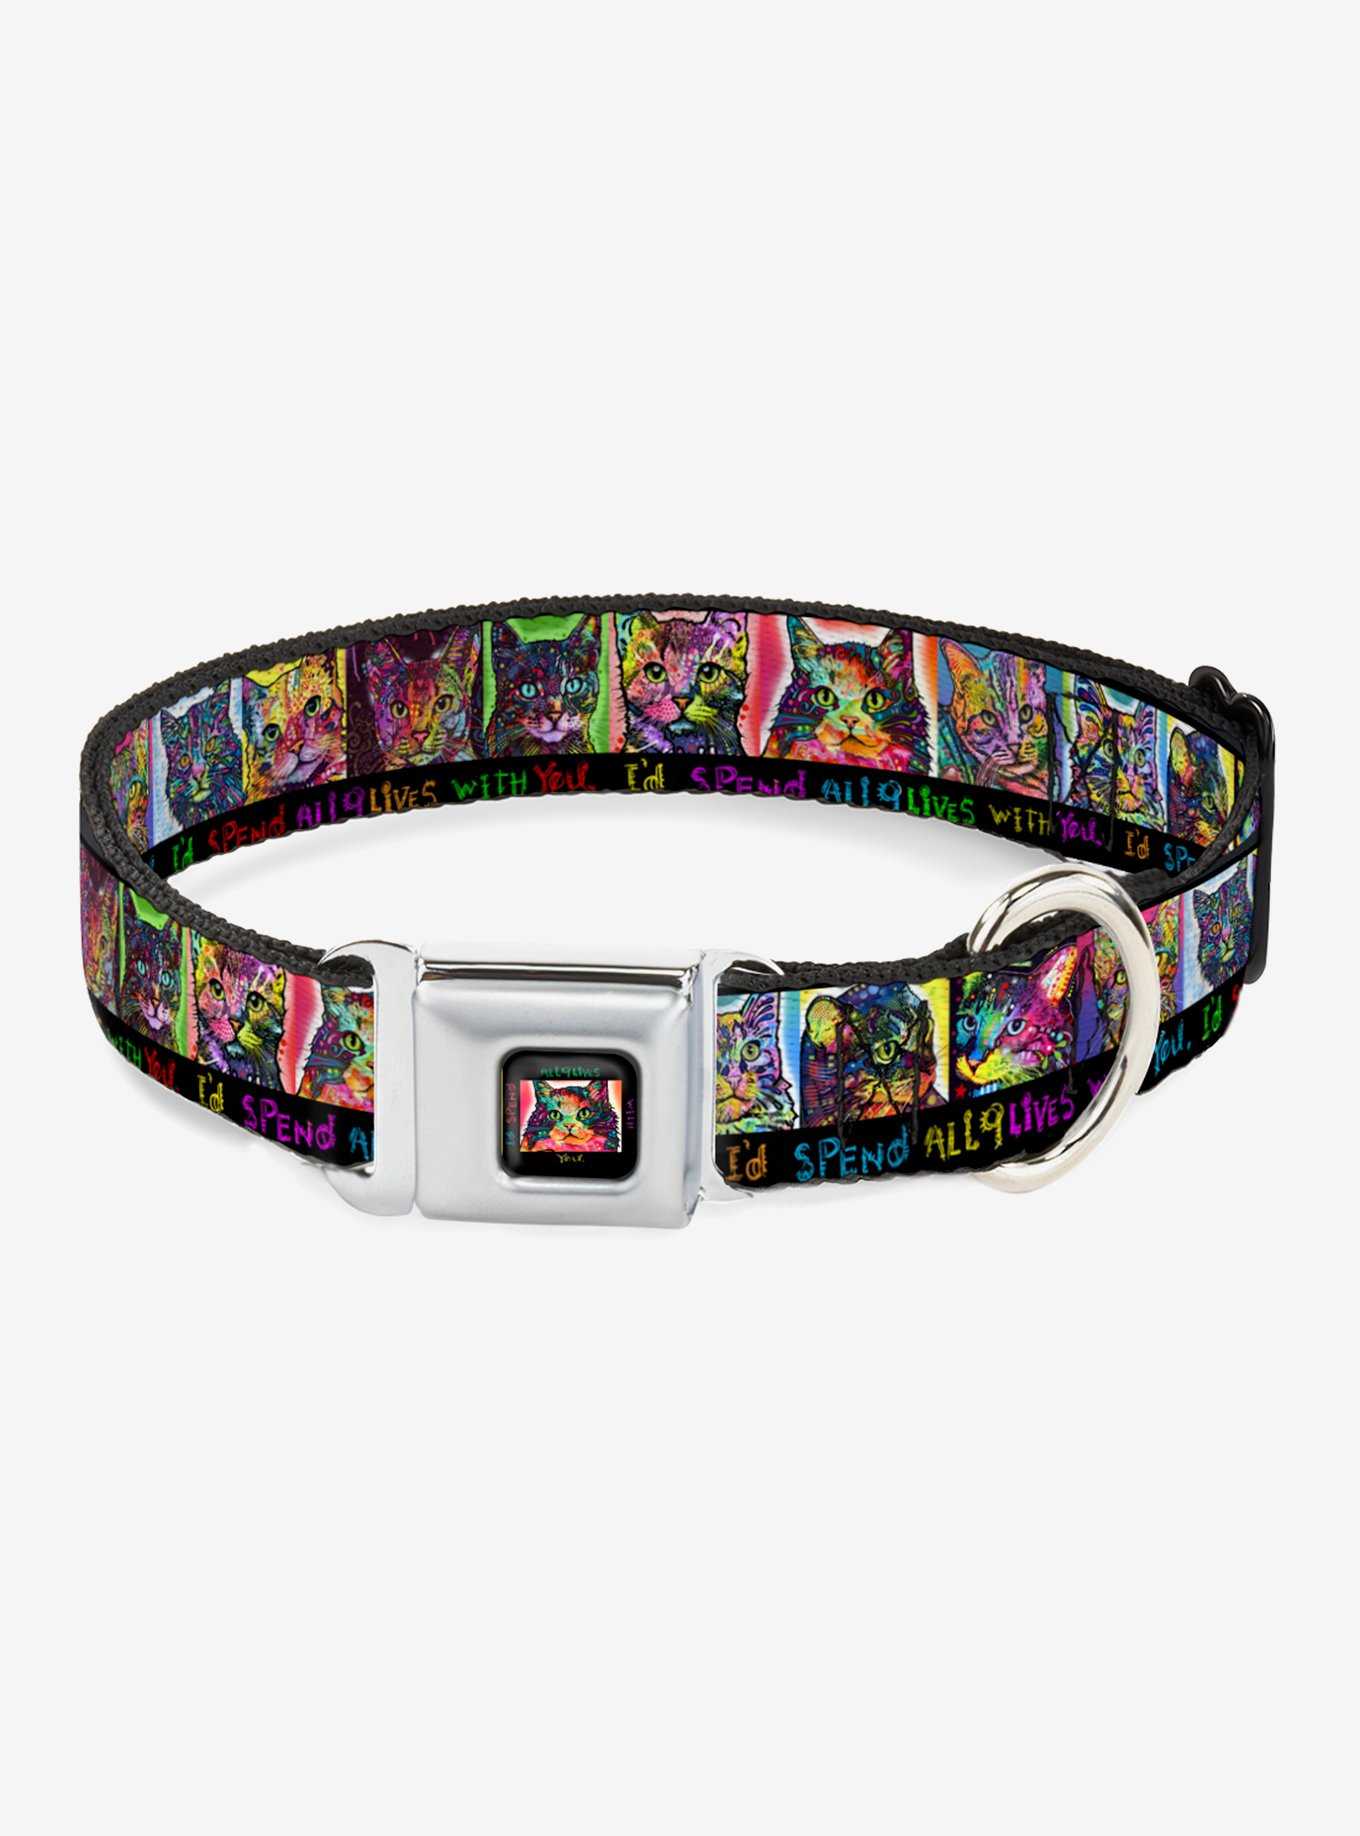 Cat Portraits Id Spend All 9 Lives With You Seatbelt Buckle Dog Collar, , hi-res